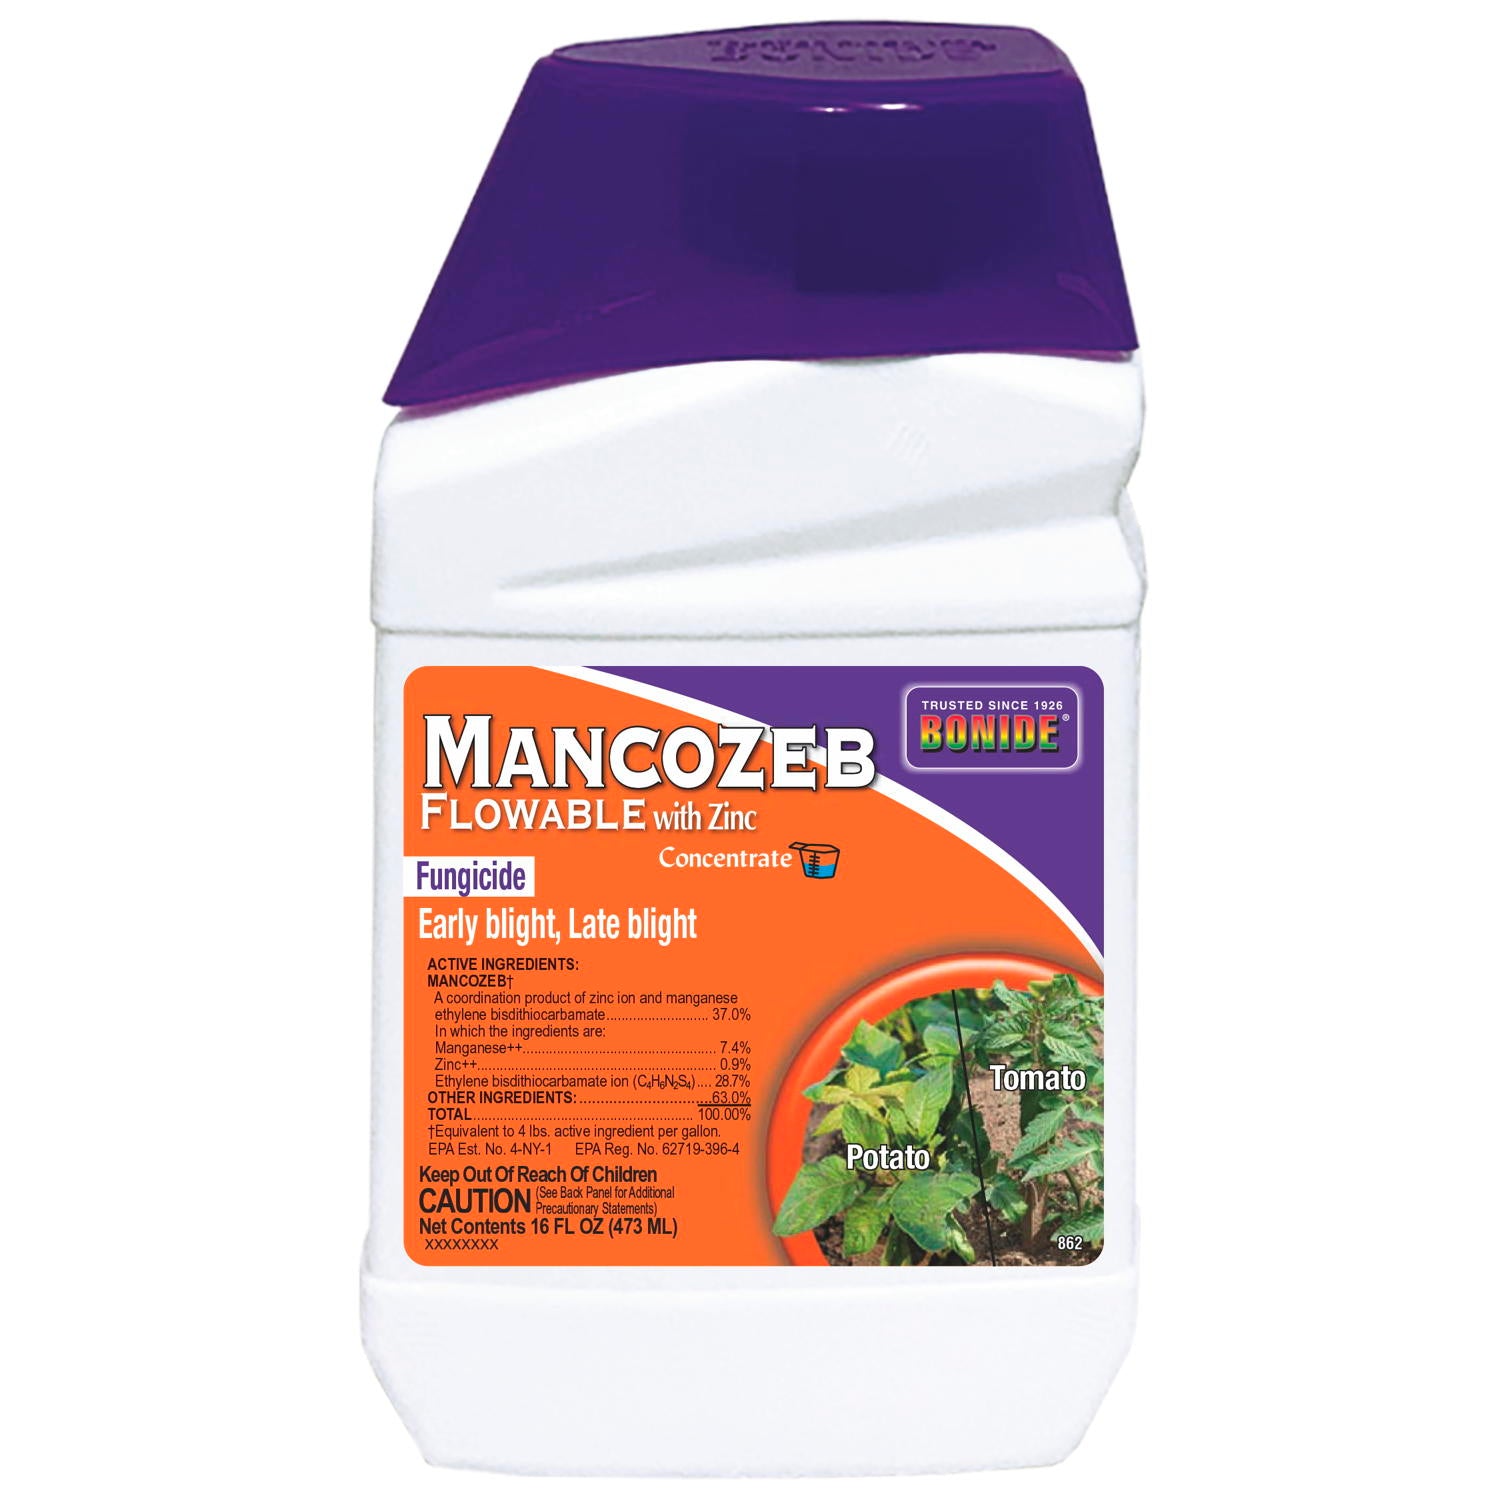 An easy to use fungicide with zinc, great for blight. Use on shrubs and vegetables